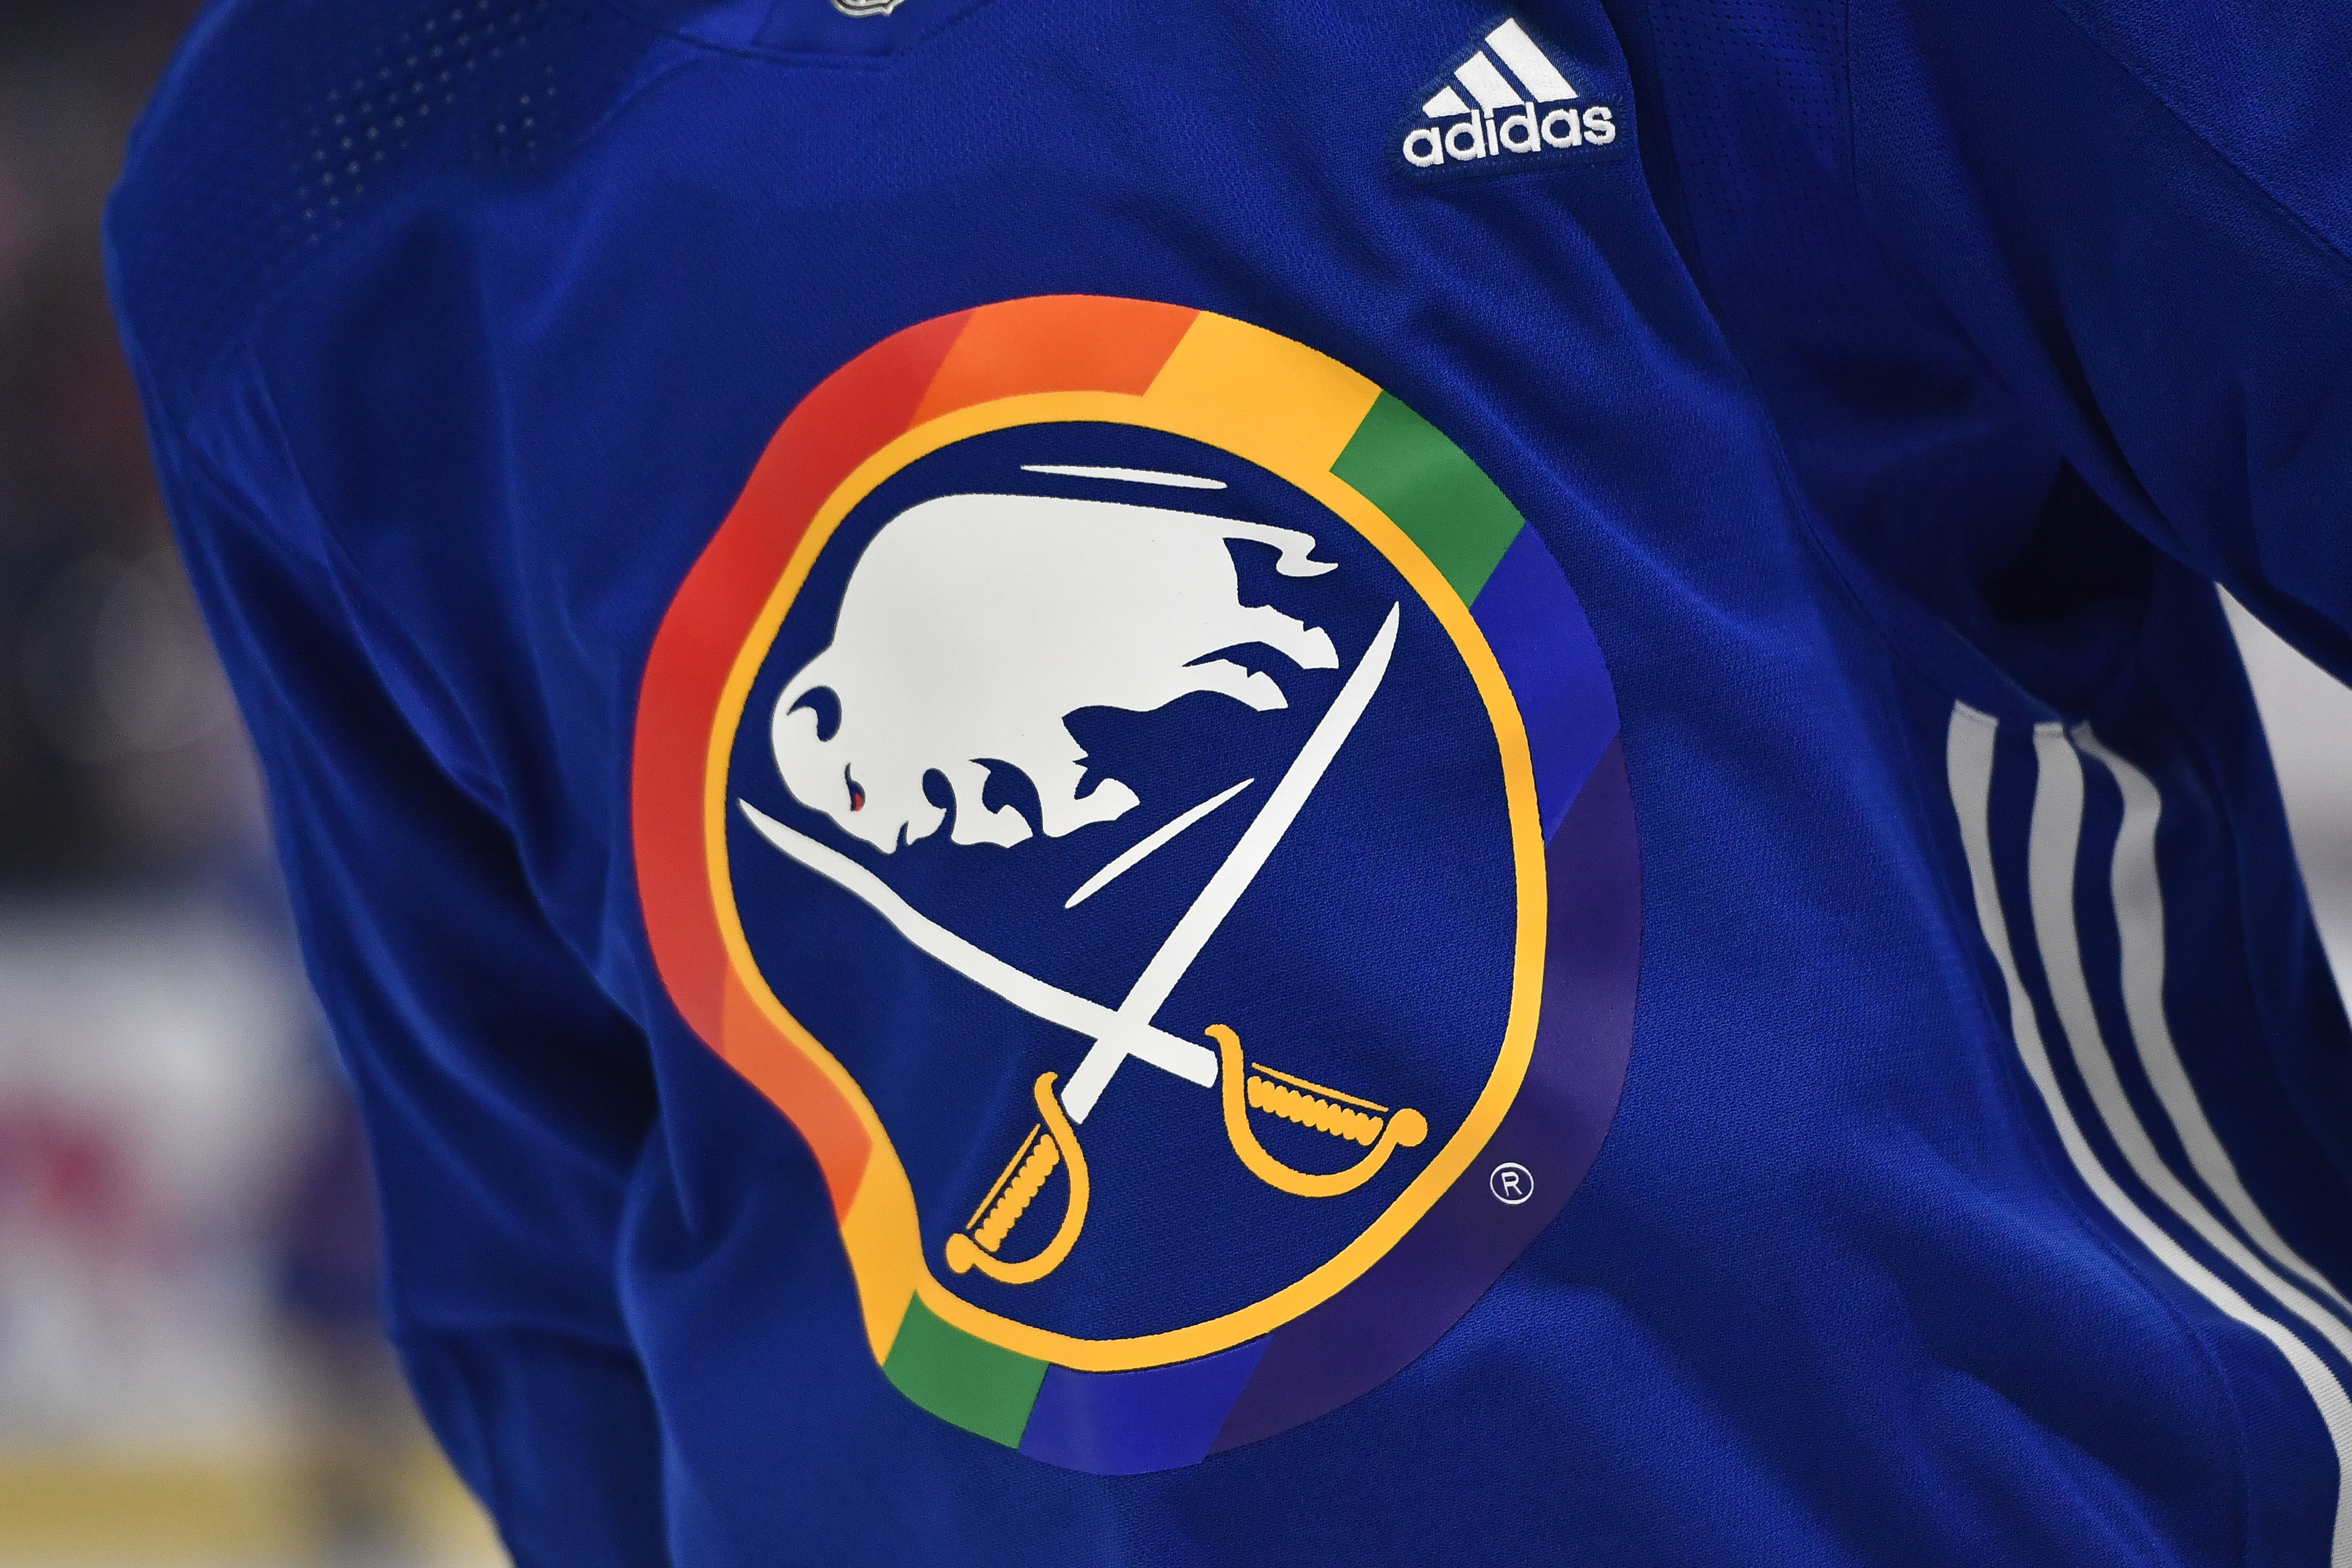 The NHL is sending players to Pride marches this year - Outsports